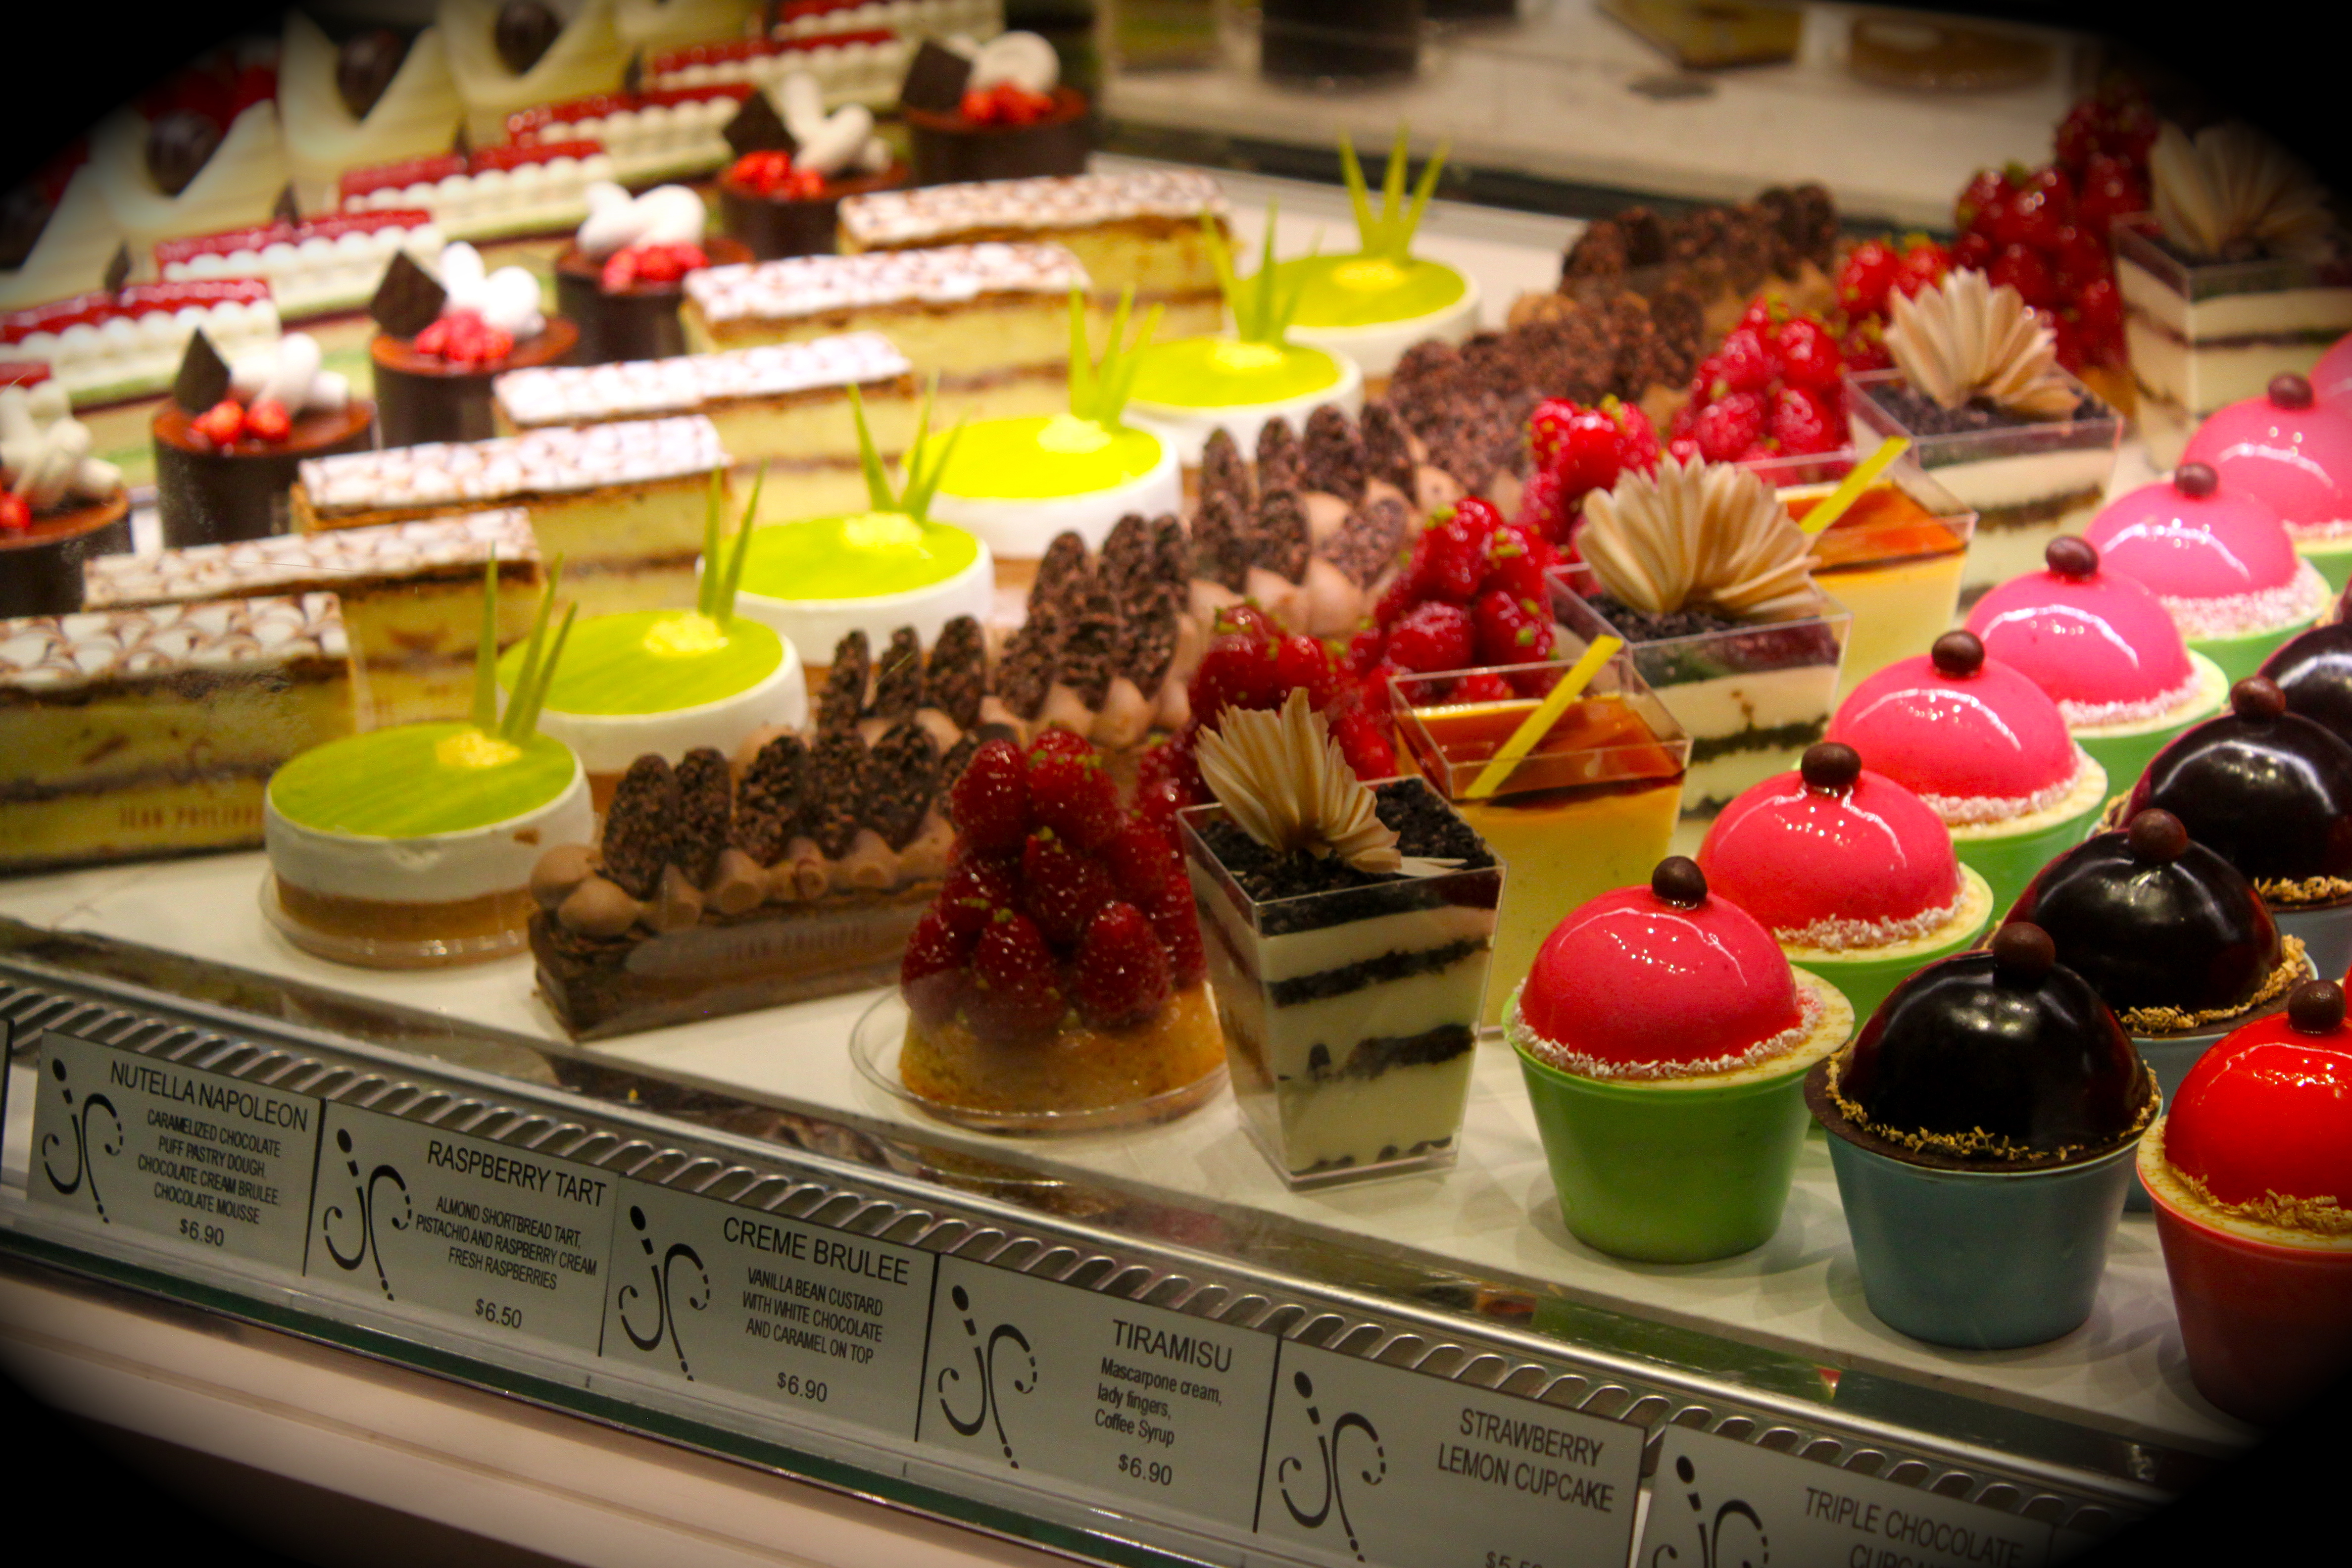 The menu at Ritz-Carlton Cafe in Macau has a scrumptious selection of classic French patisseries